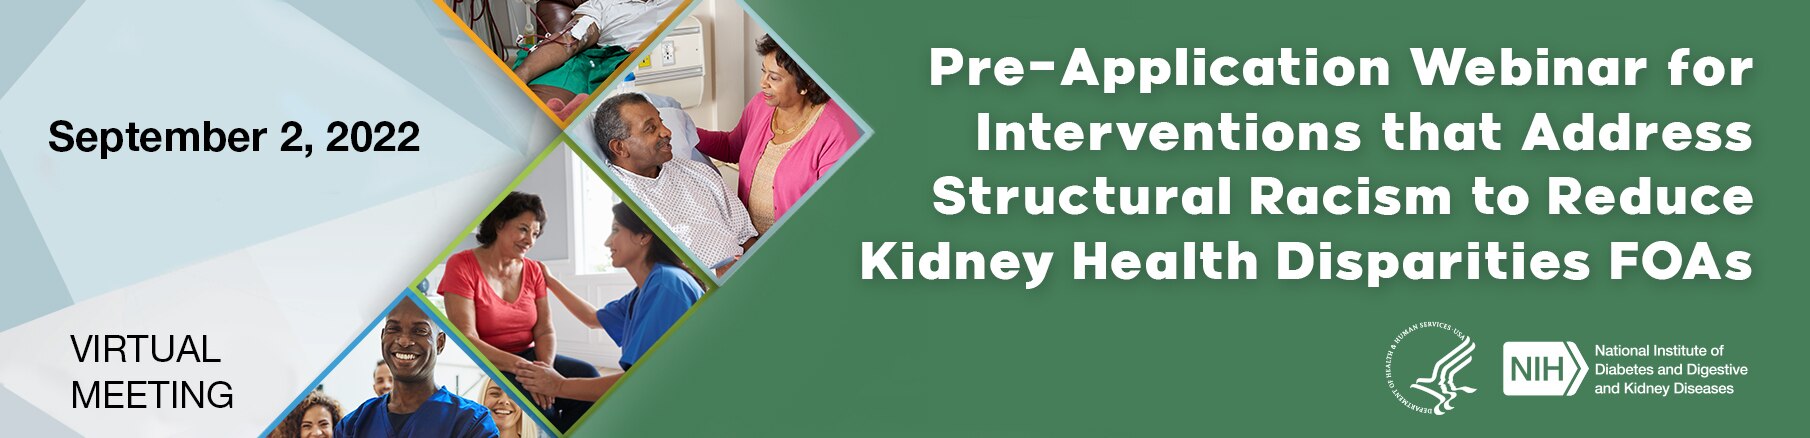 Web banner for the meeting information page titled Pre-Application Webinar for Interventions that Address Structural Racism to Reduce Kidney Health Disparities FOAs.